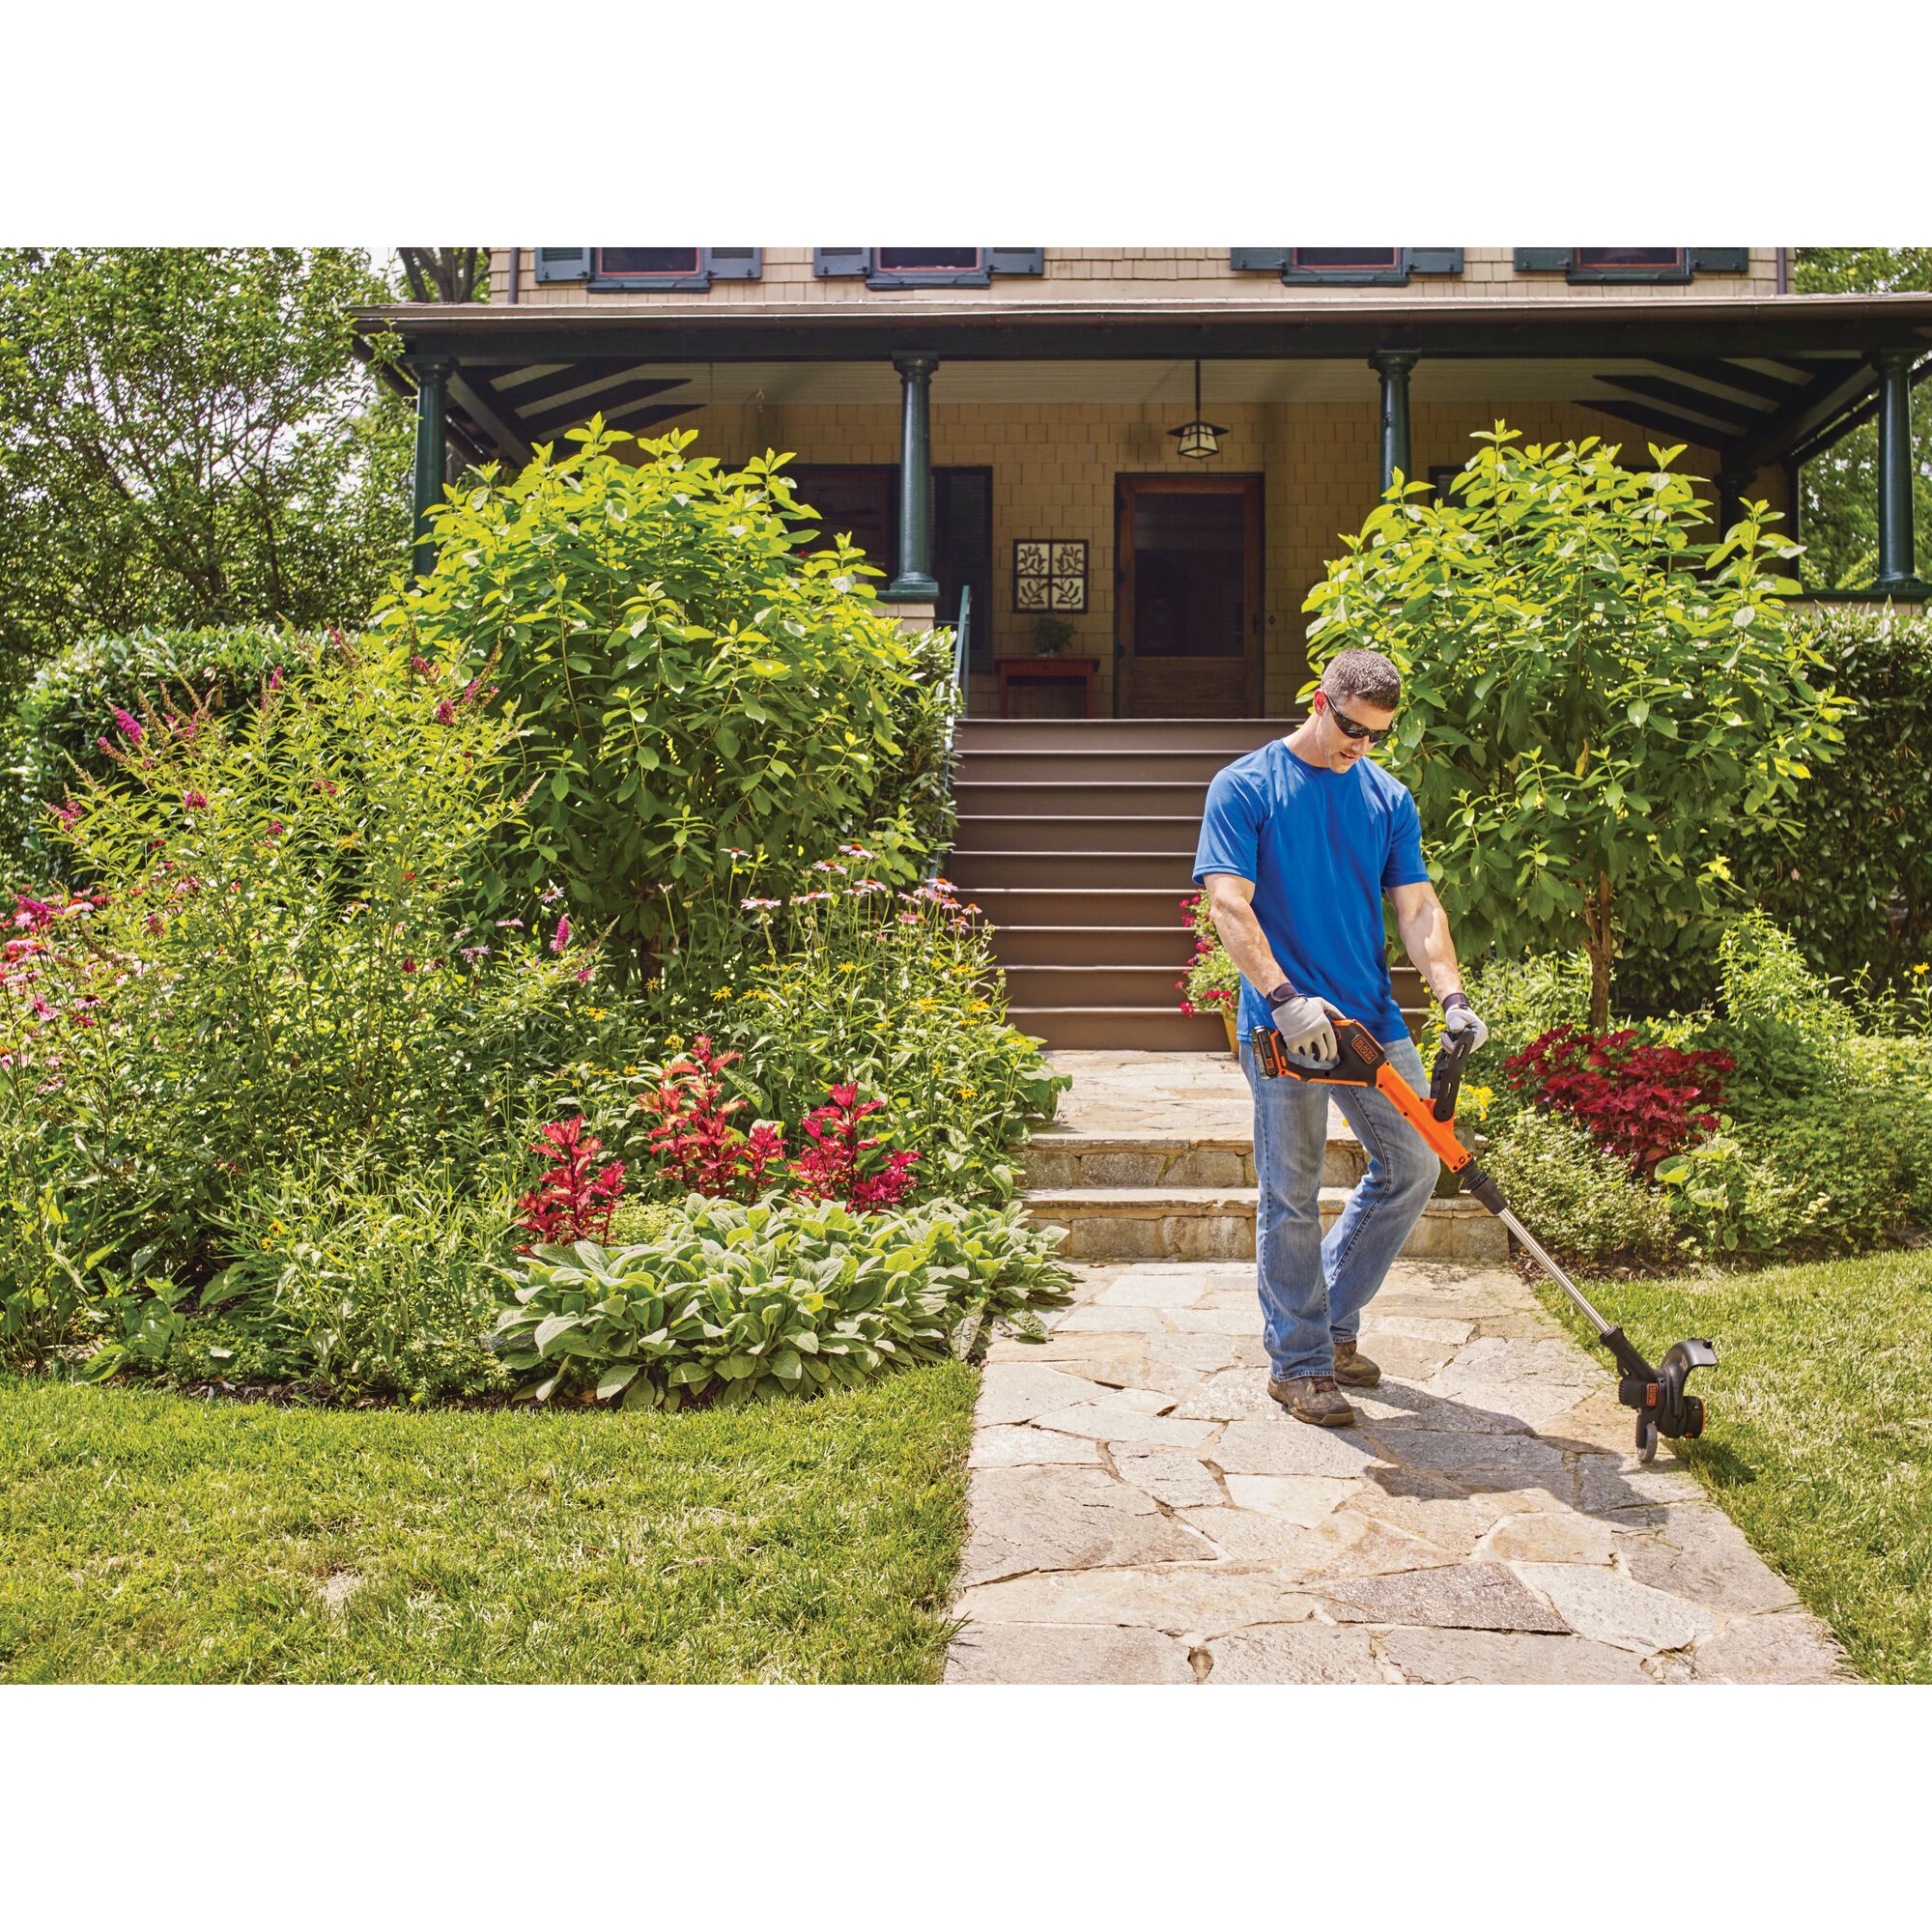 Man using 20V Max Lithium Easyfeed string Trimmer/Edger along walkway to front door of a house.